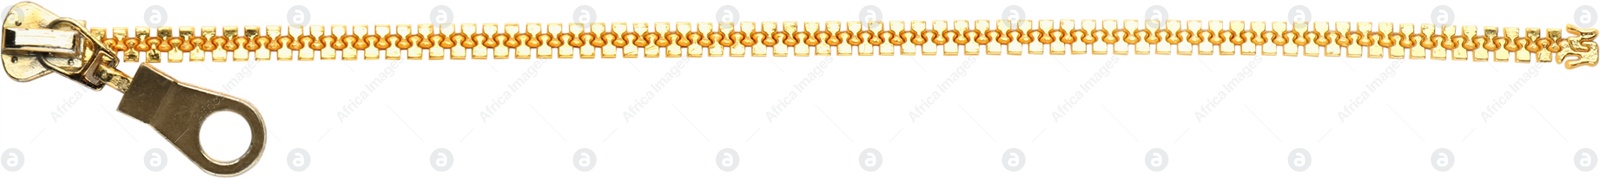 Image of Metal zipper isolated on white. Banner design